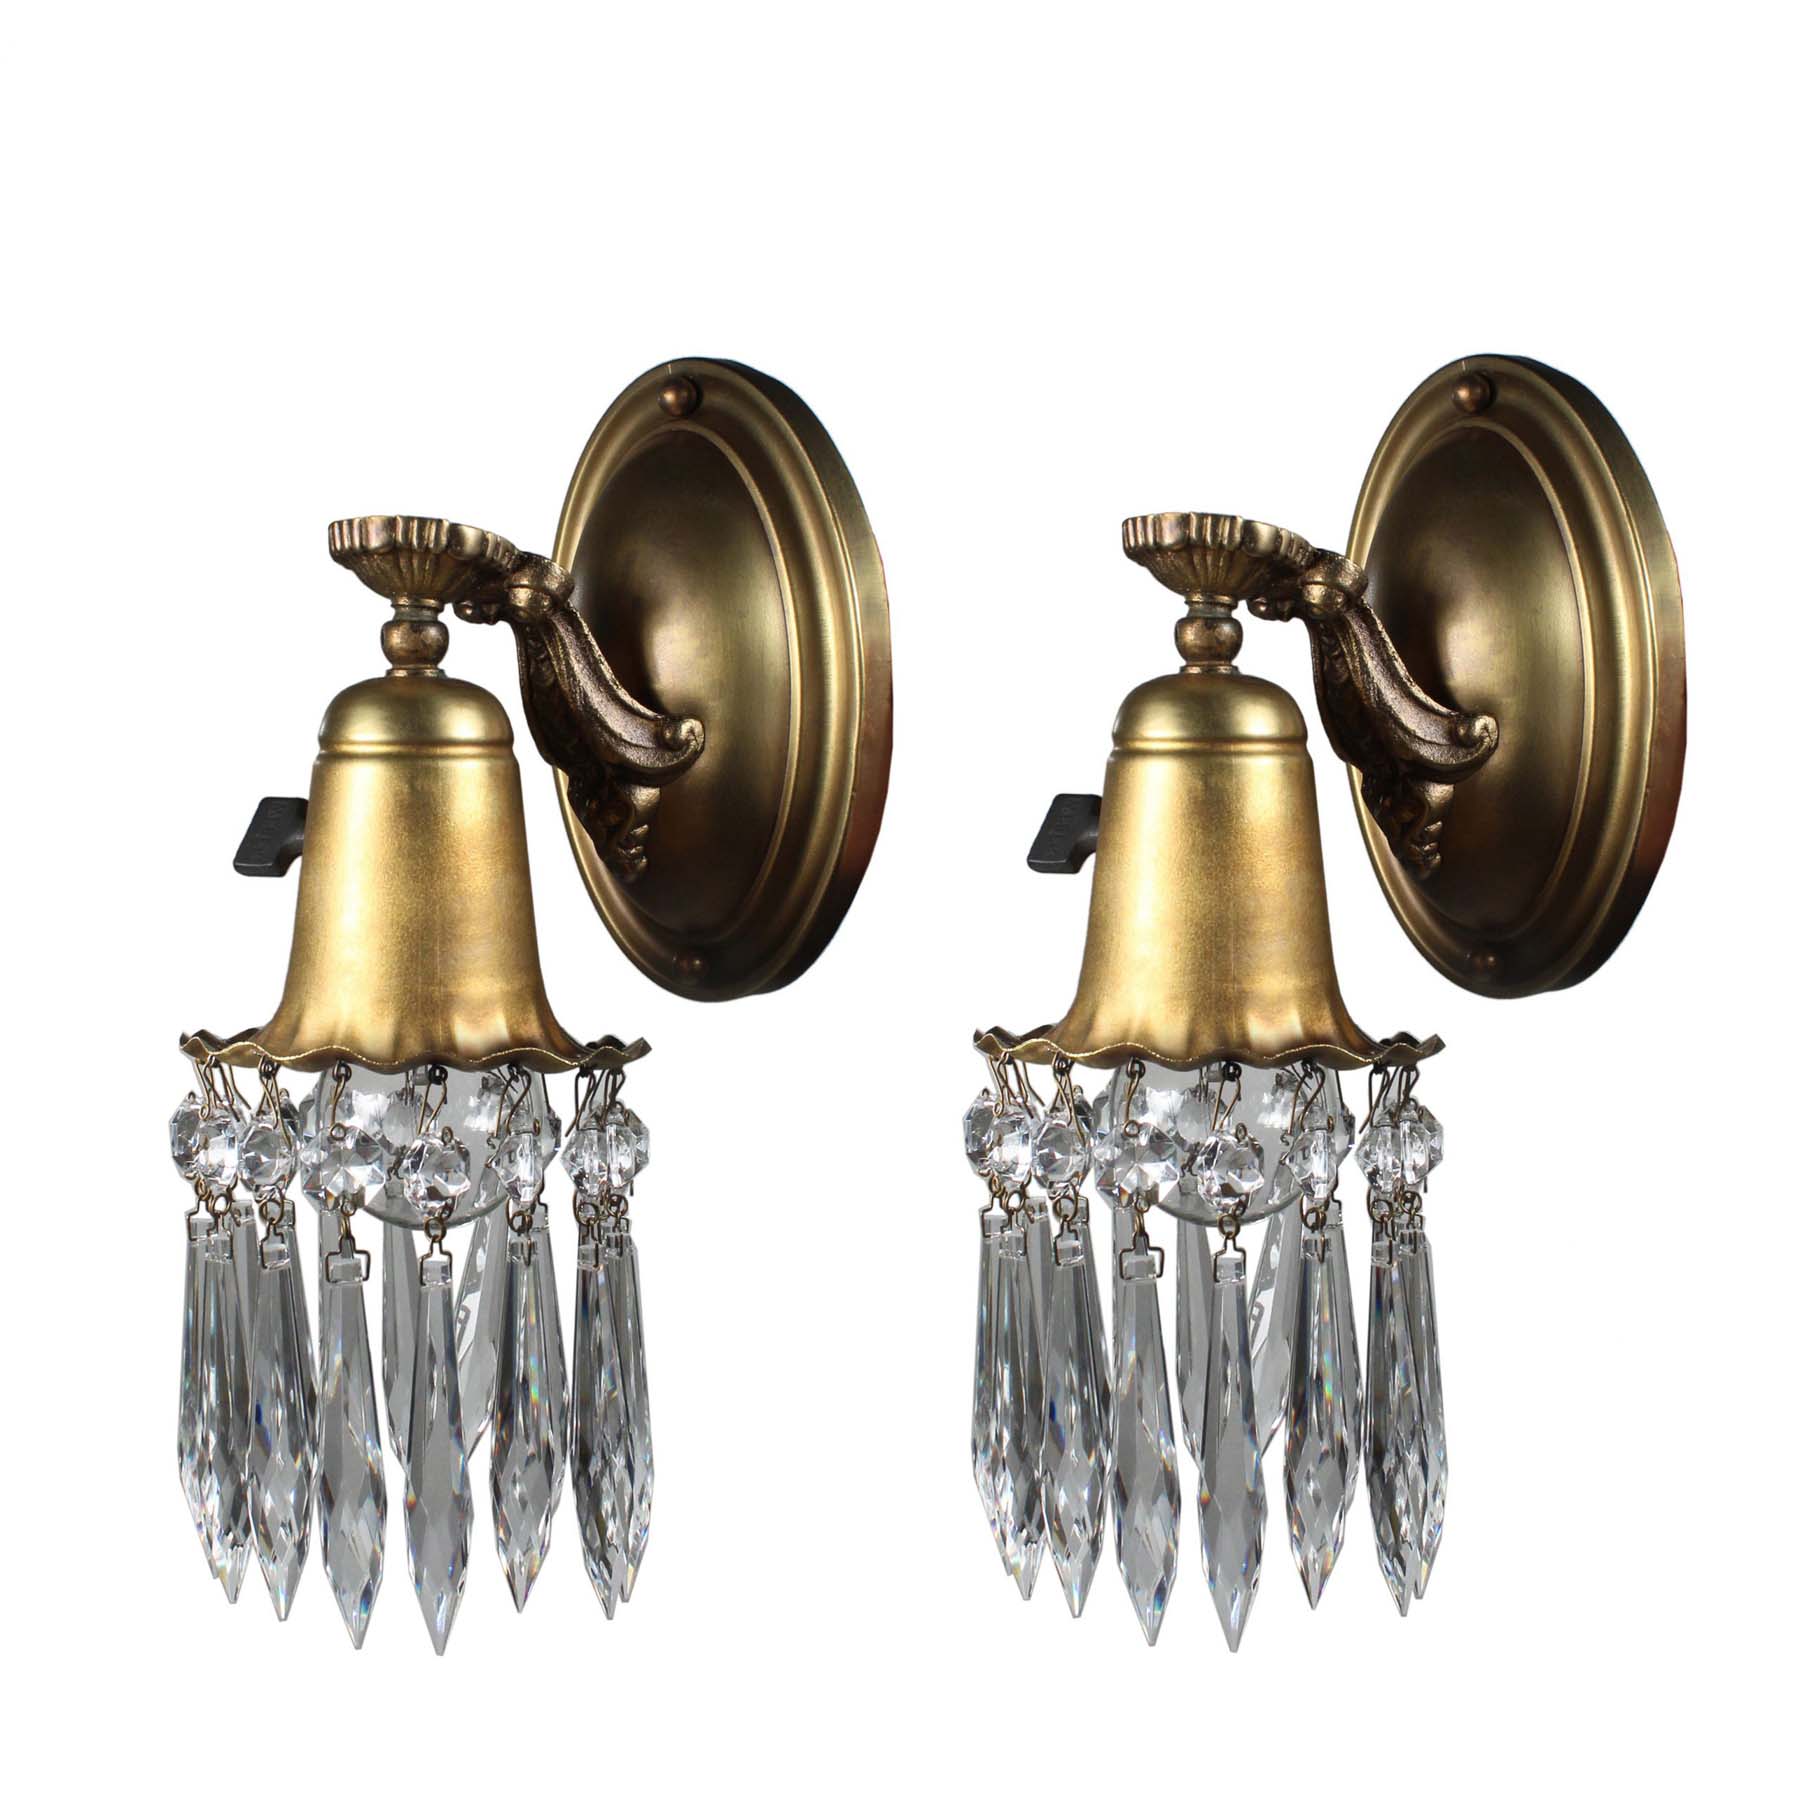 SOLD Pair of Antique Brass Sconces with Prisms-0